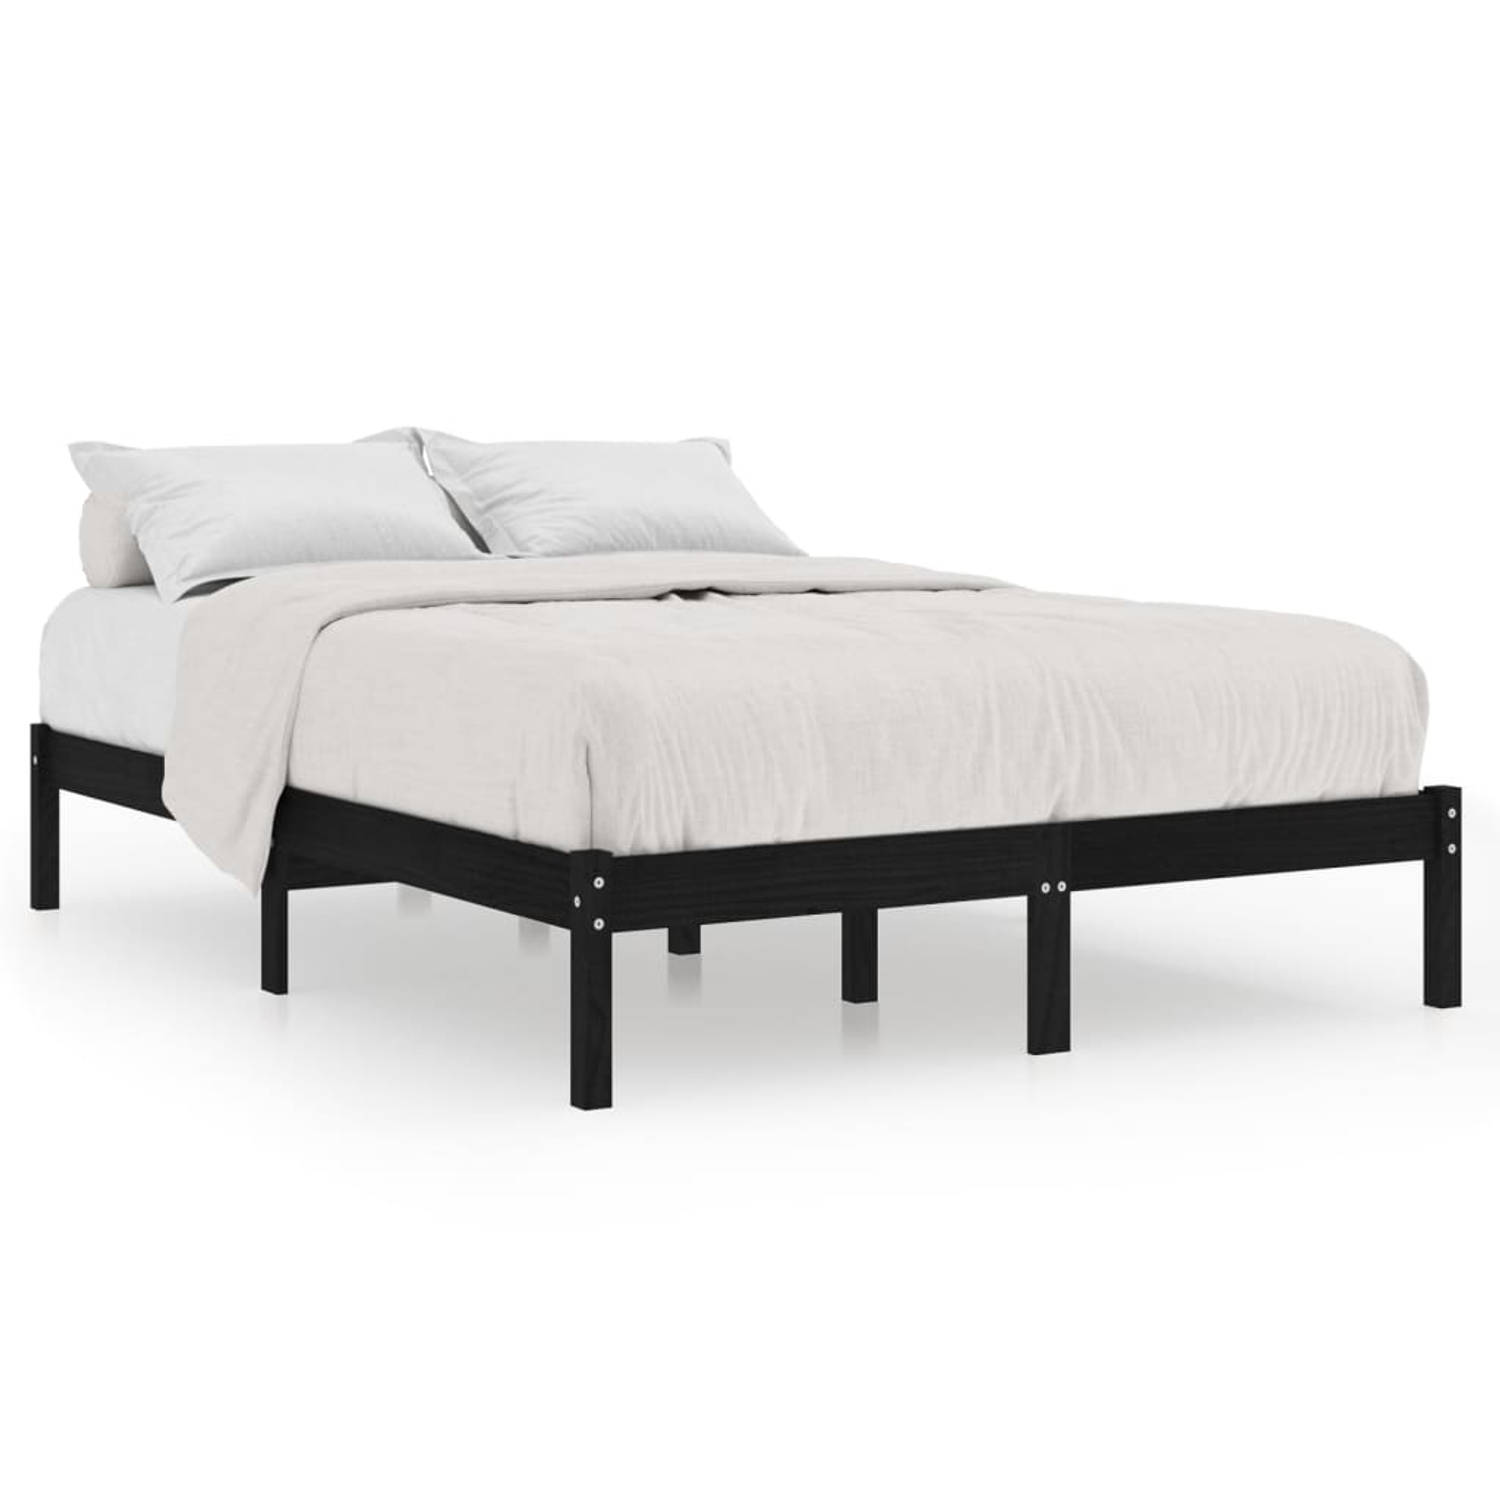 The Living Store Bedframe massief hout zwart 135x190 cm 4FT6 Double - Bed